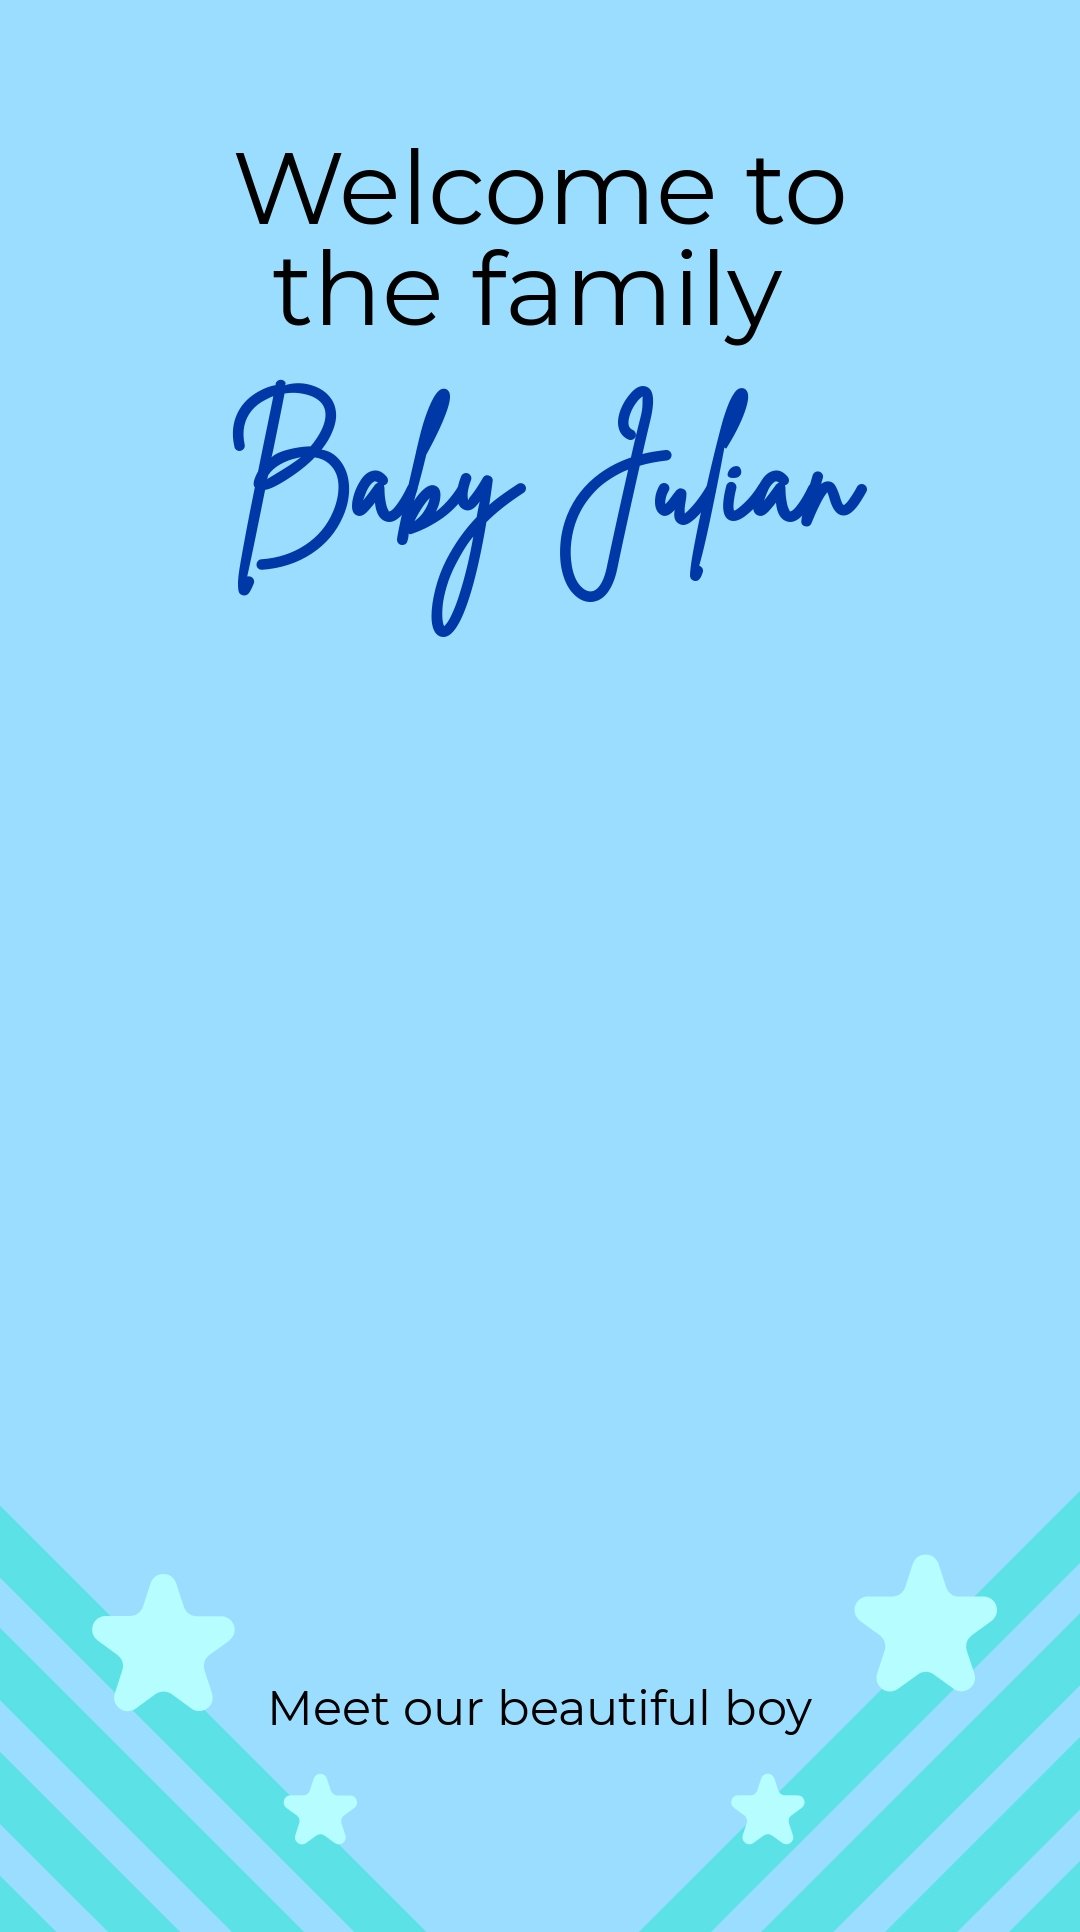 Baby Announcement Photo Snapchat Geofilter